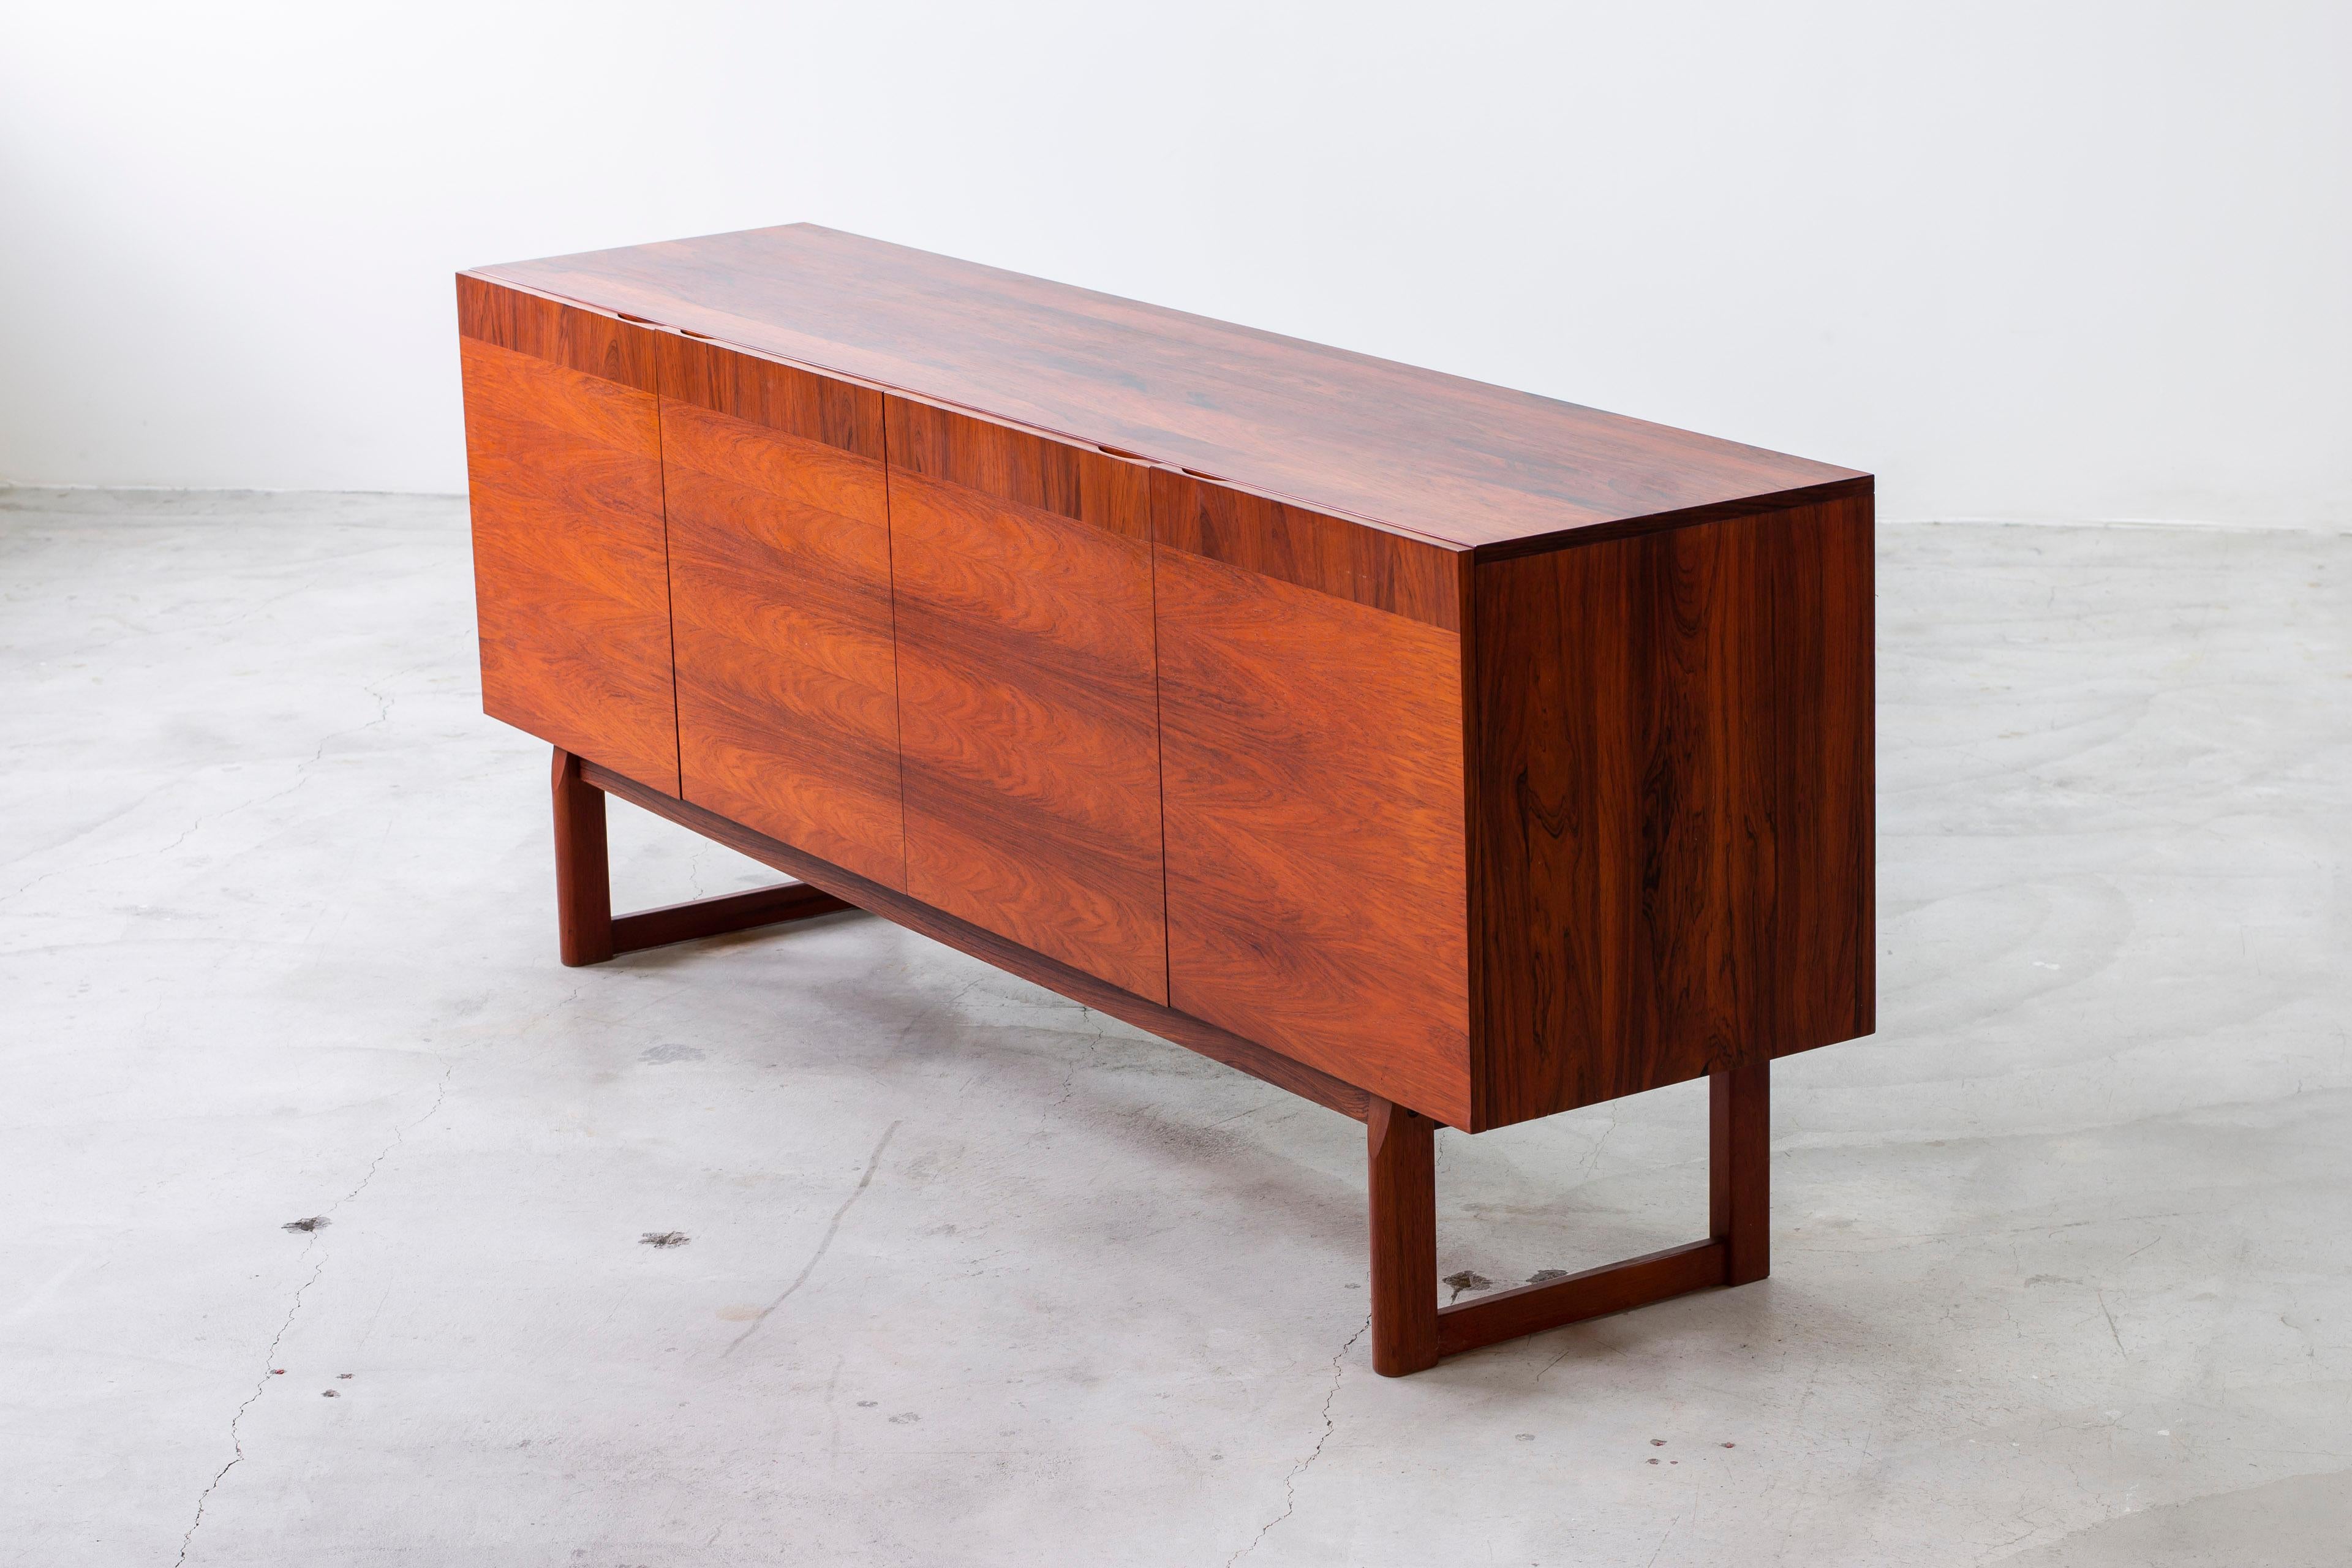 Sideboard model Monaco designed by Nils Jonsson. Produced by Hugo Troeds in Sweden during the 1960s. Exterior in palisander wood and interior in contrasting light oak and white lacquered details. The shelves are optional and can be adjusted in